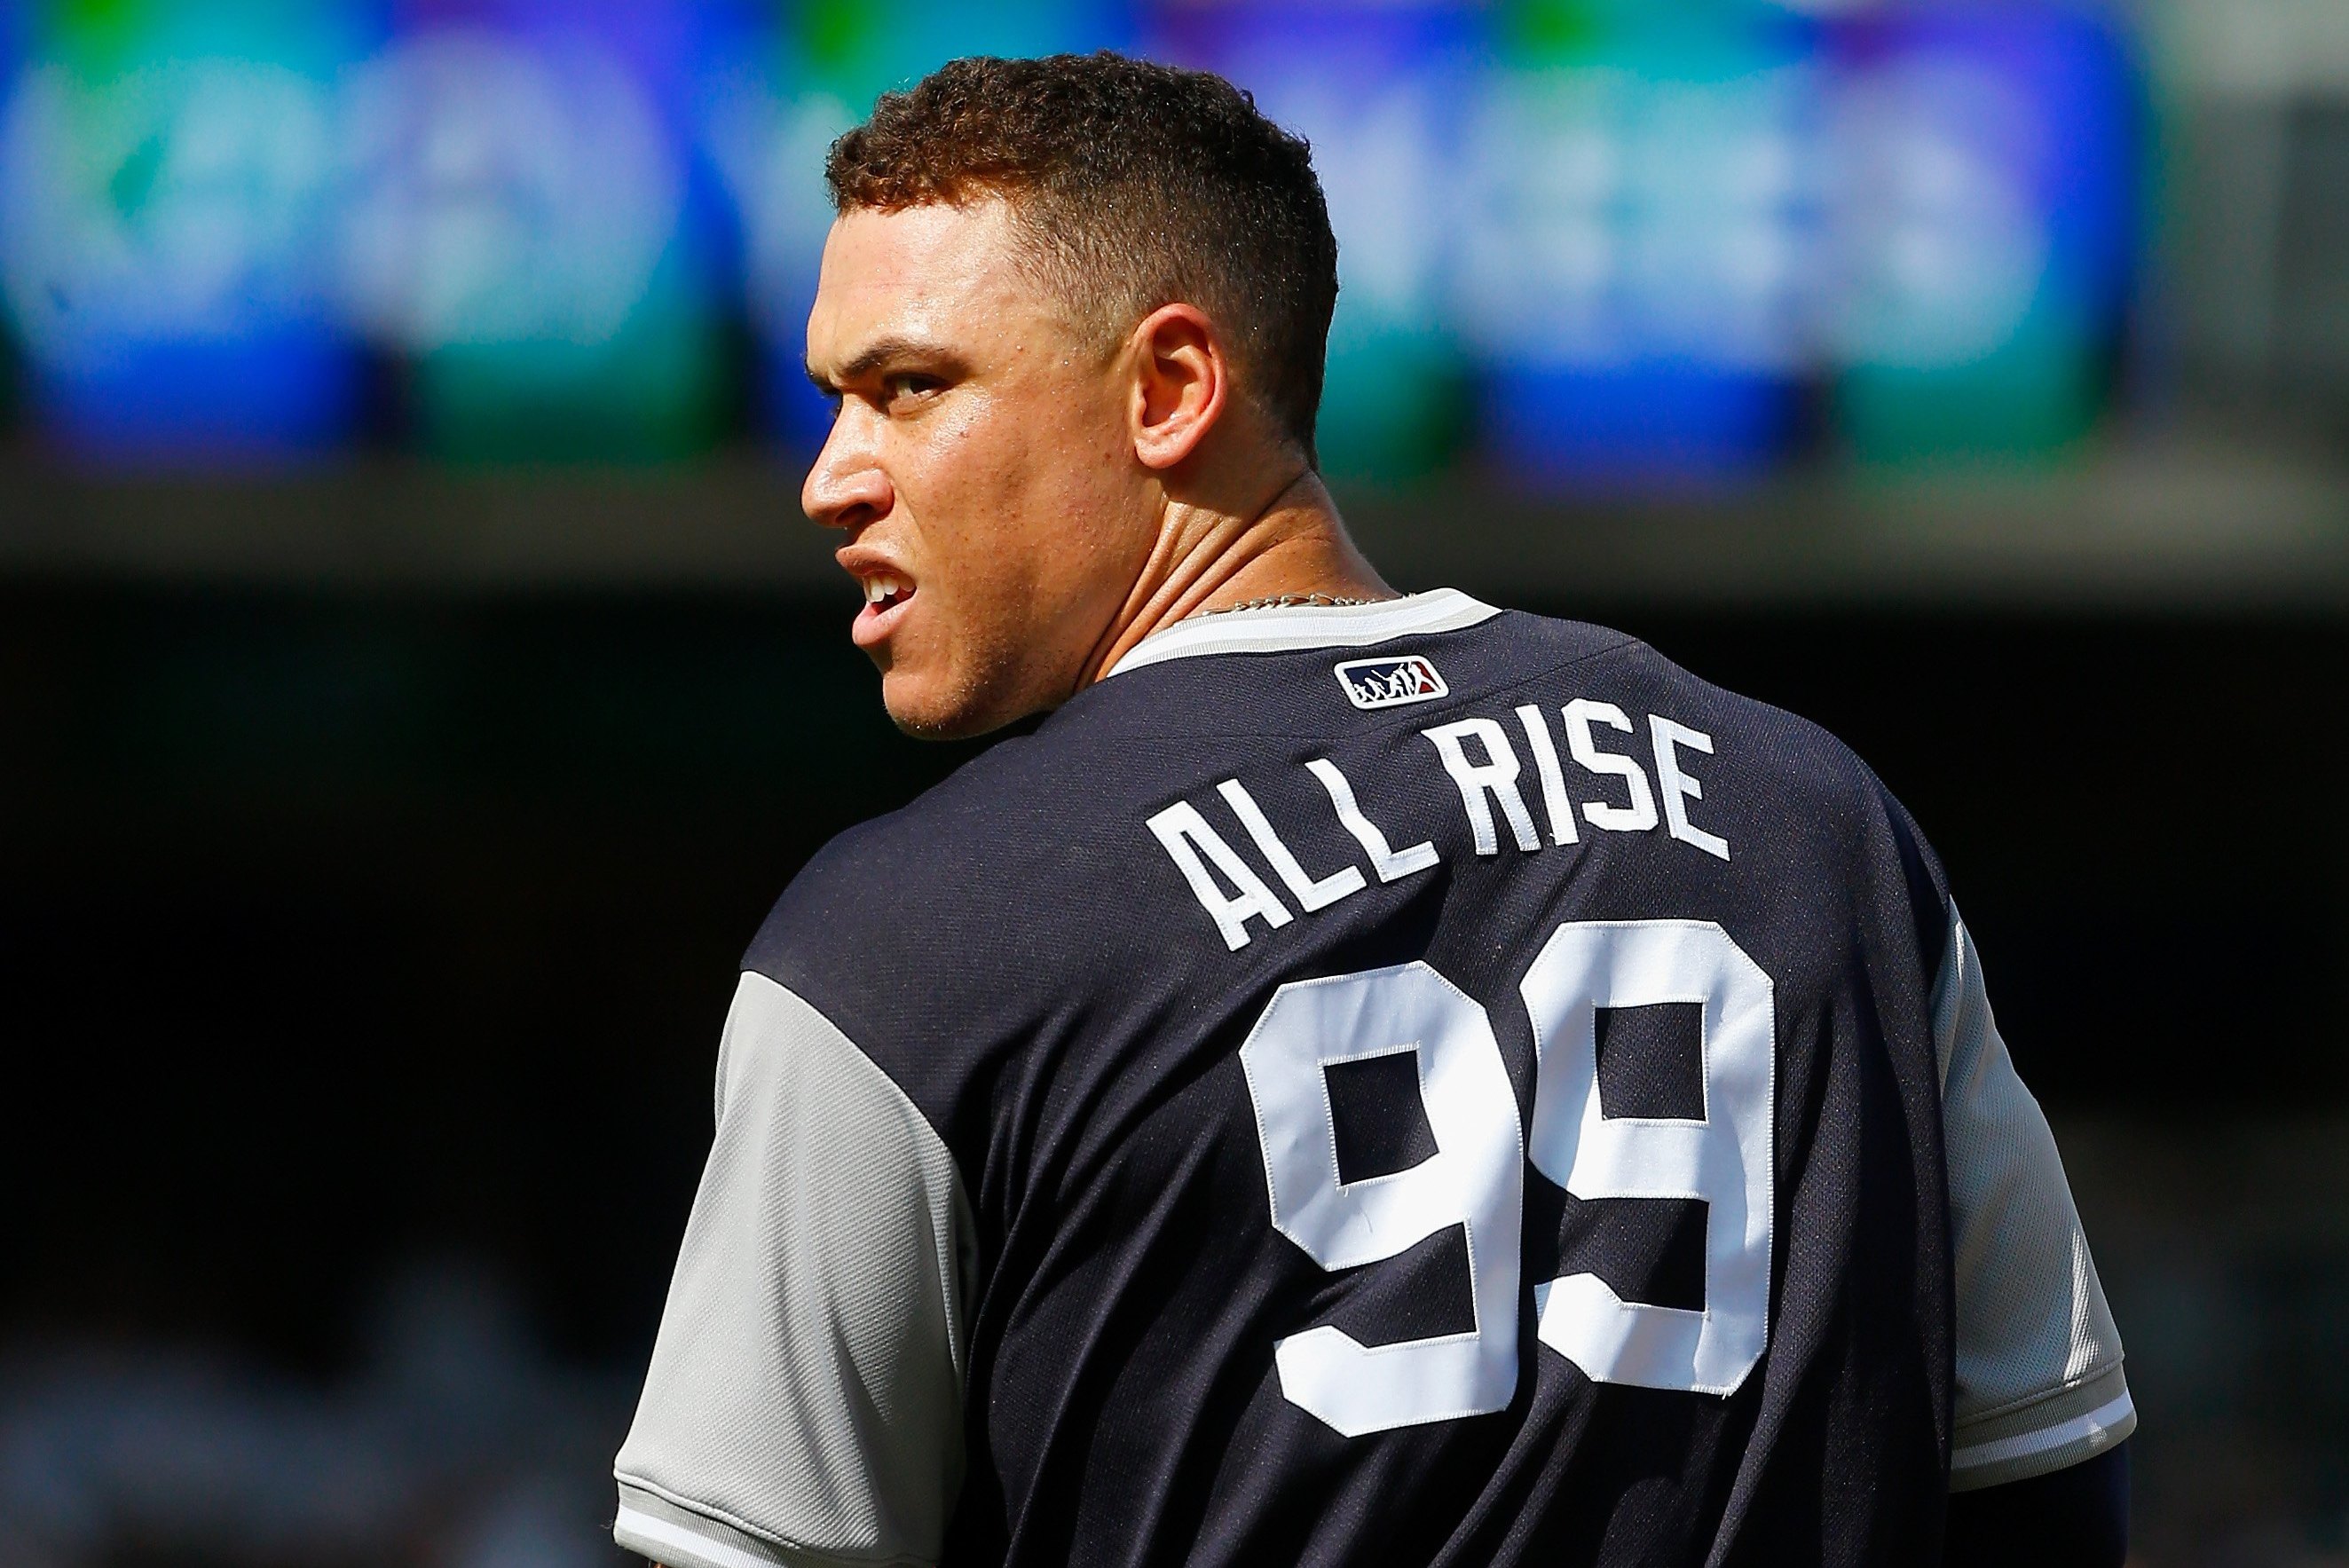 Aaron Judge Benched by Yankees to 'Refresh' Star Amid Slump